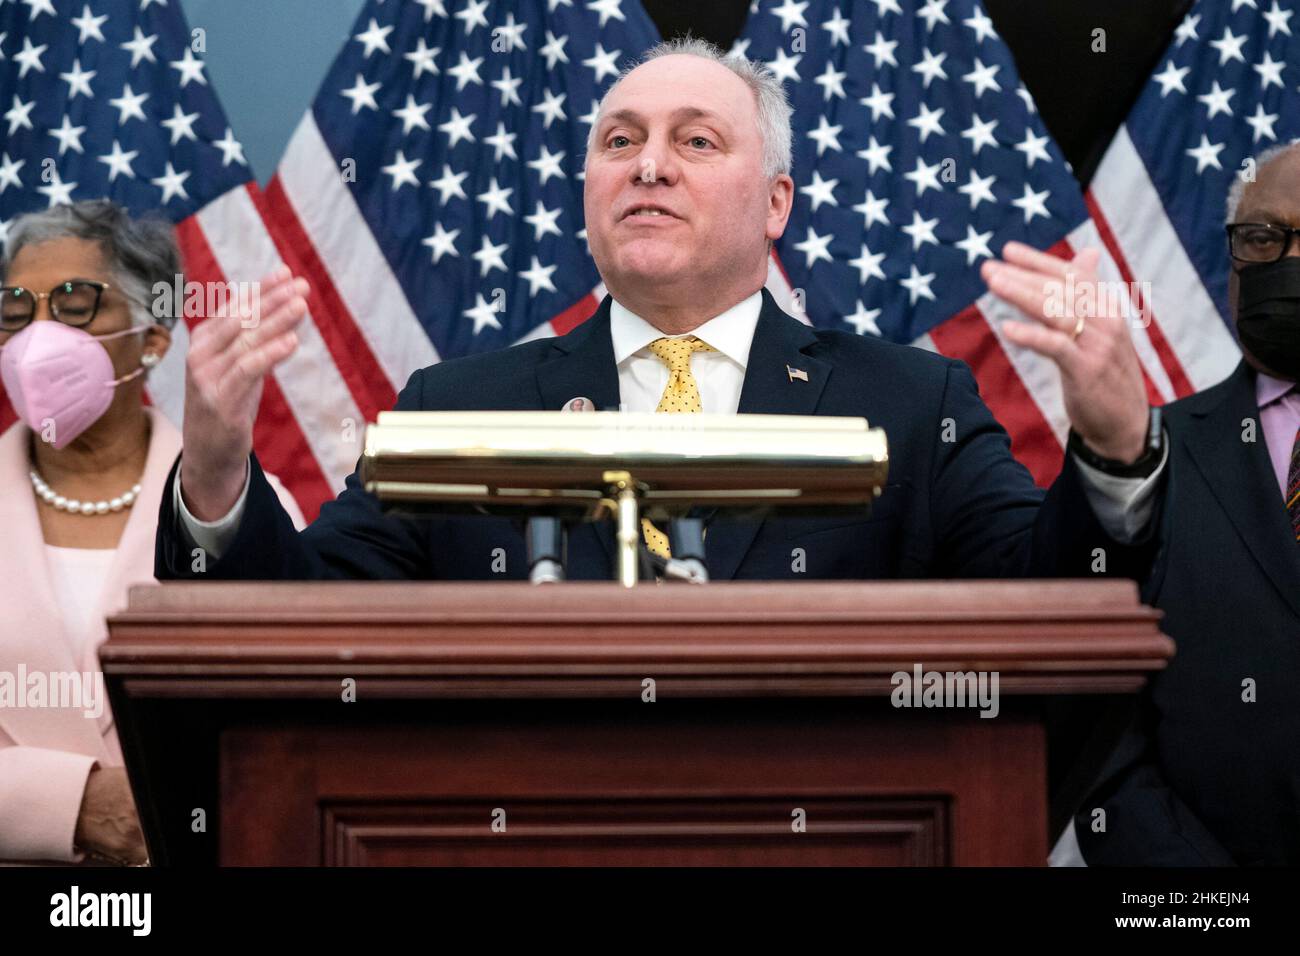 House Minority Whip Steve Scalise (R-La.) addresses reporters during a press conference to unveil the Joseph H. Rainey Room in the in the U.S. Capitol in Washington, DC, USA on Thursday, February 3, 2022. Former Rep. Joseph H. Rainey (R-S.C.) was the first elected Black member of the House of Representatives who served from 1870 to 1879. Photo by Greg Nash/Pool/ABACAPRESS.COM Stock Photo